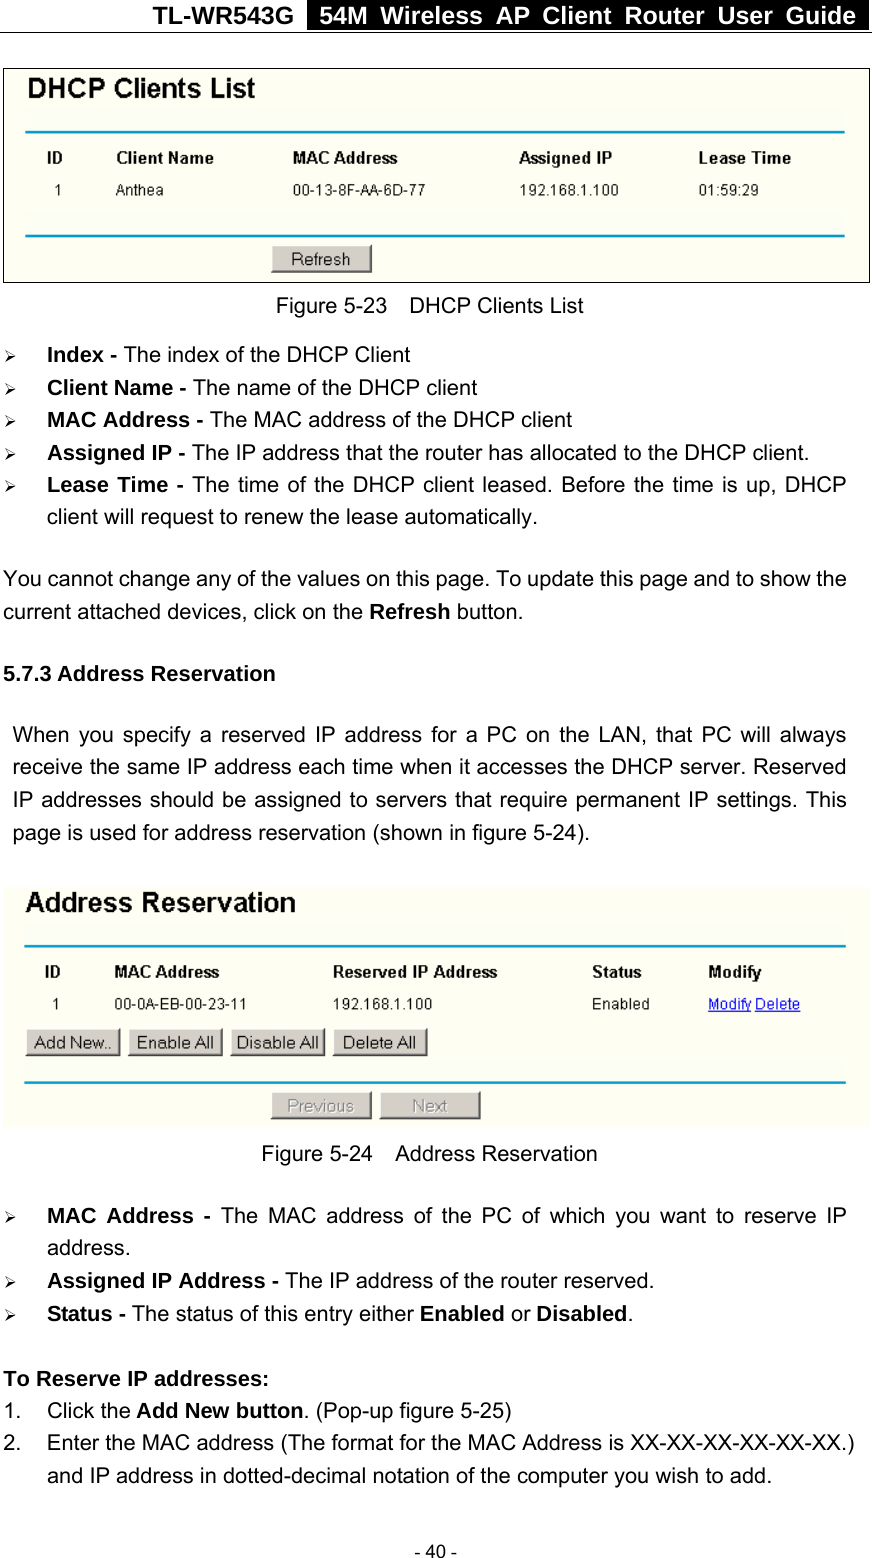 TL-WR543G   54M Wireless AP Client Router User Guide   Figure 5-23    DHCP Clients List ¾ Index - The index of the DHCP Client   ¾ Client Name - The name of the DHCP client   ¾ MAC Address - The MAC address of the DHCP client   ¾ Assigned IP - The IP address that the router has allocated to the DHCP client. ¾ Lease Time - The time of the DHCP client leased. Before the time is up, DHCP client will request to renew the lease automatically. You cannot change any of the values on this page. To update this page and to show the current attached devices, click on the Refresh button. 5.7.3 Address Reservation When you specify a reserved IP address for a PC on the LAN, that PC will always receive the same IP address each time when it accesses the DHCP server. Reserved IP addresses should be assigned to servers that require permanent IP settings. This page is used for address reservation (shown in figure 5-24).  Figure 5-24  Address Reservation ¾ MAC Address - The MAC address of the PC of which you want to reserve IP address. ¾ Assigned IP Address - The IP address of the router reserved. ¾ Status - The status of this entry either Enabled or Disabled.  To Reserve IP addresses:  1. Click the Add New button. (Pop-up figure 5-25) 2.  Enter the MAC address (The format for the MAC Address is XX-XX-XX-XX-XX-XX.) and IP address in dotted-decimal notation of the computer you wish to add.    - 40 - 